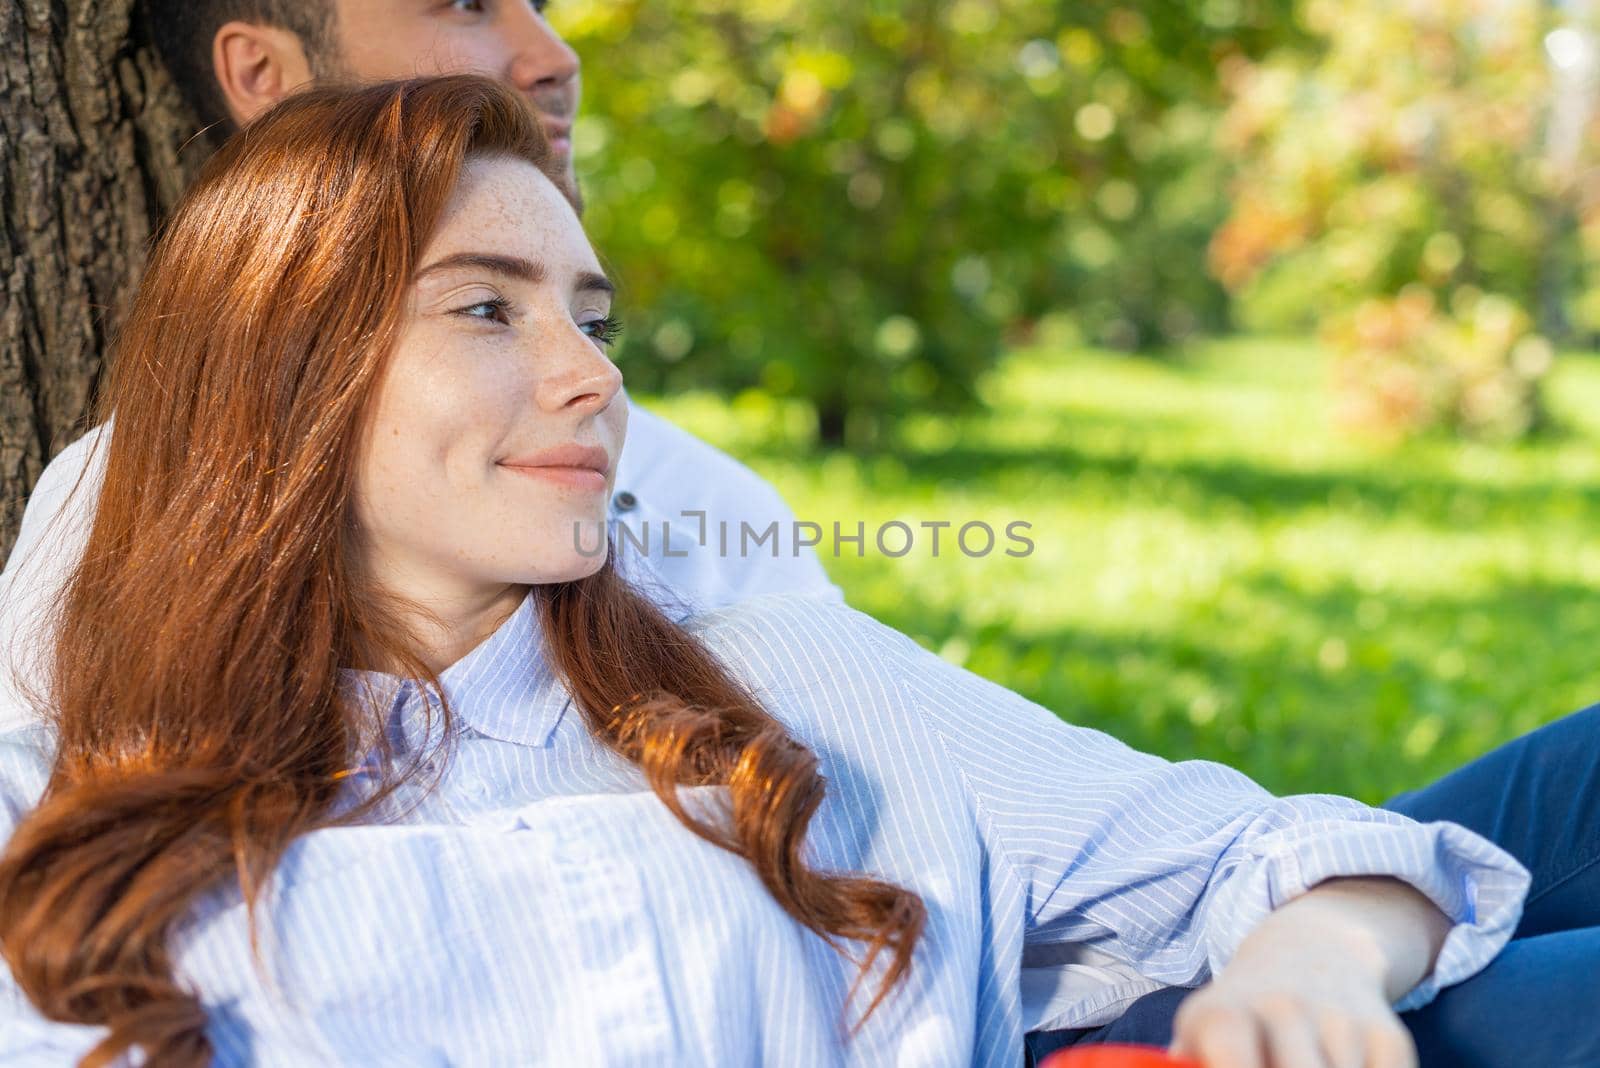 Young couple relaxing under tree in summer park on sunny day. Happy couple in love spend time outdoors together. Handsome man and pretty redhead girl enjoying each other. Romantic relationships.